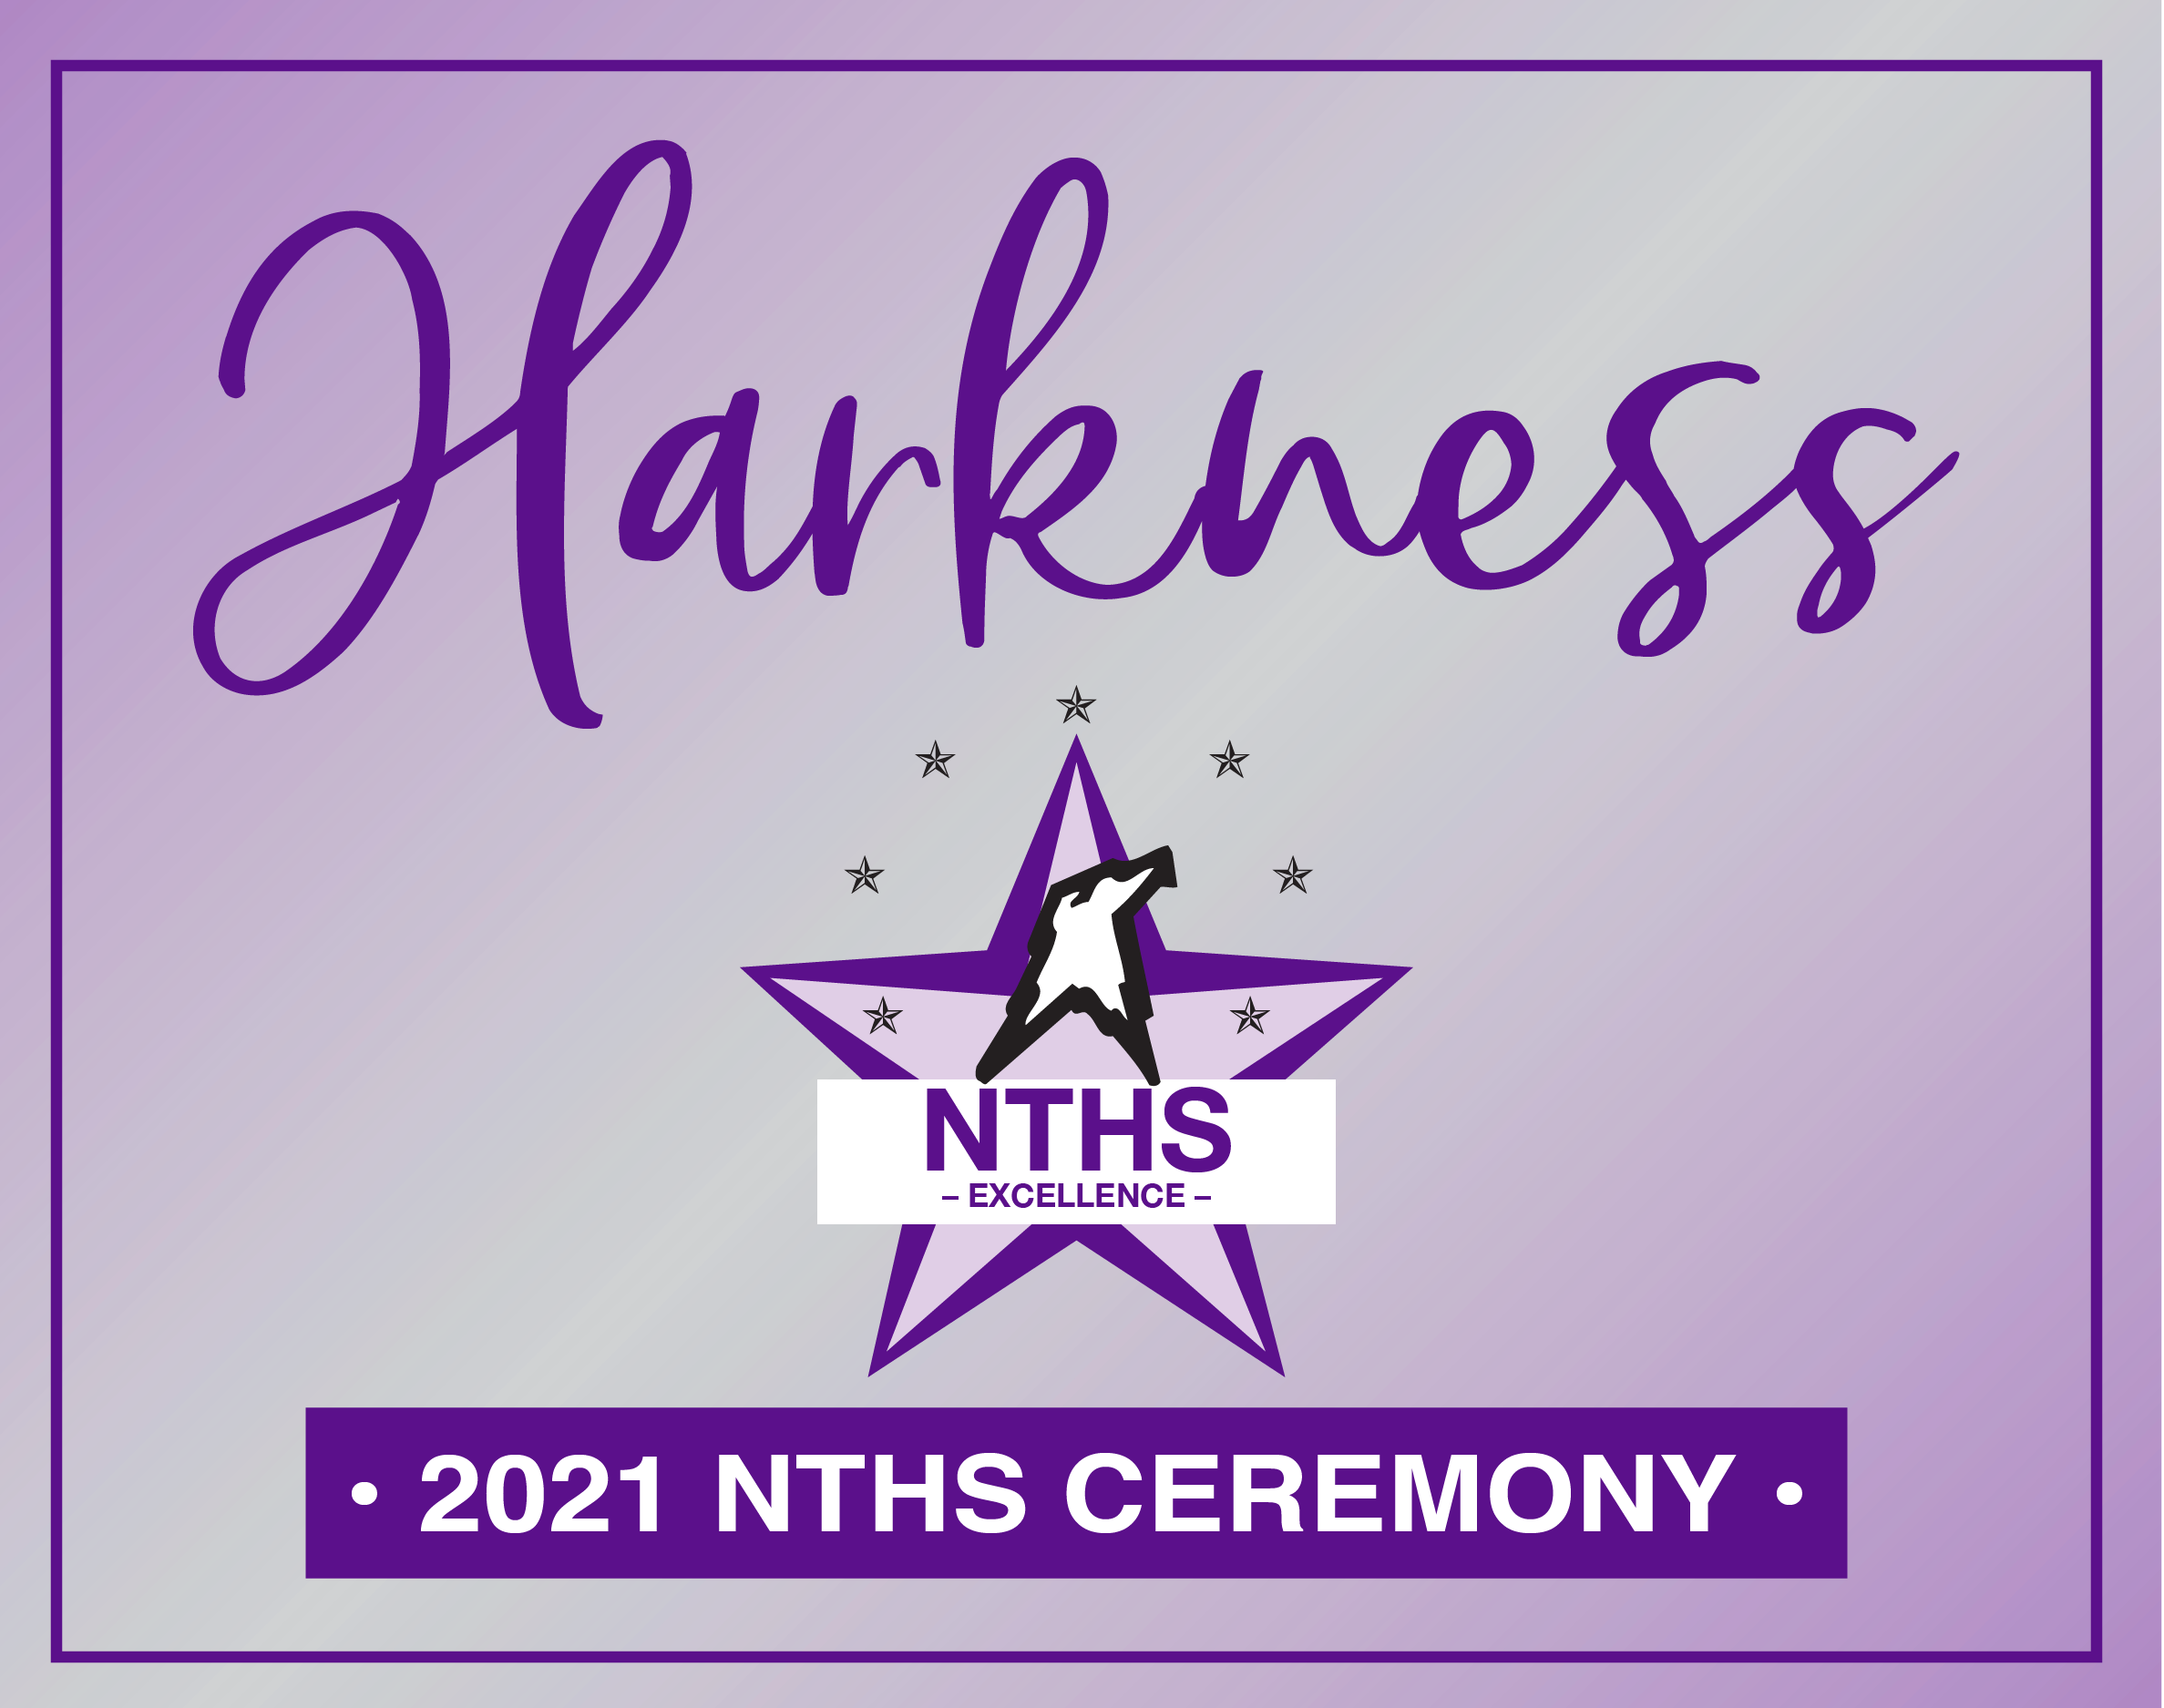 Harkness 2021 NTHS Ceremony